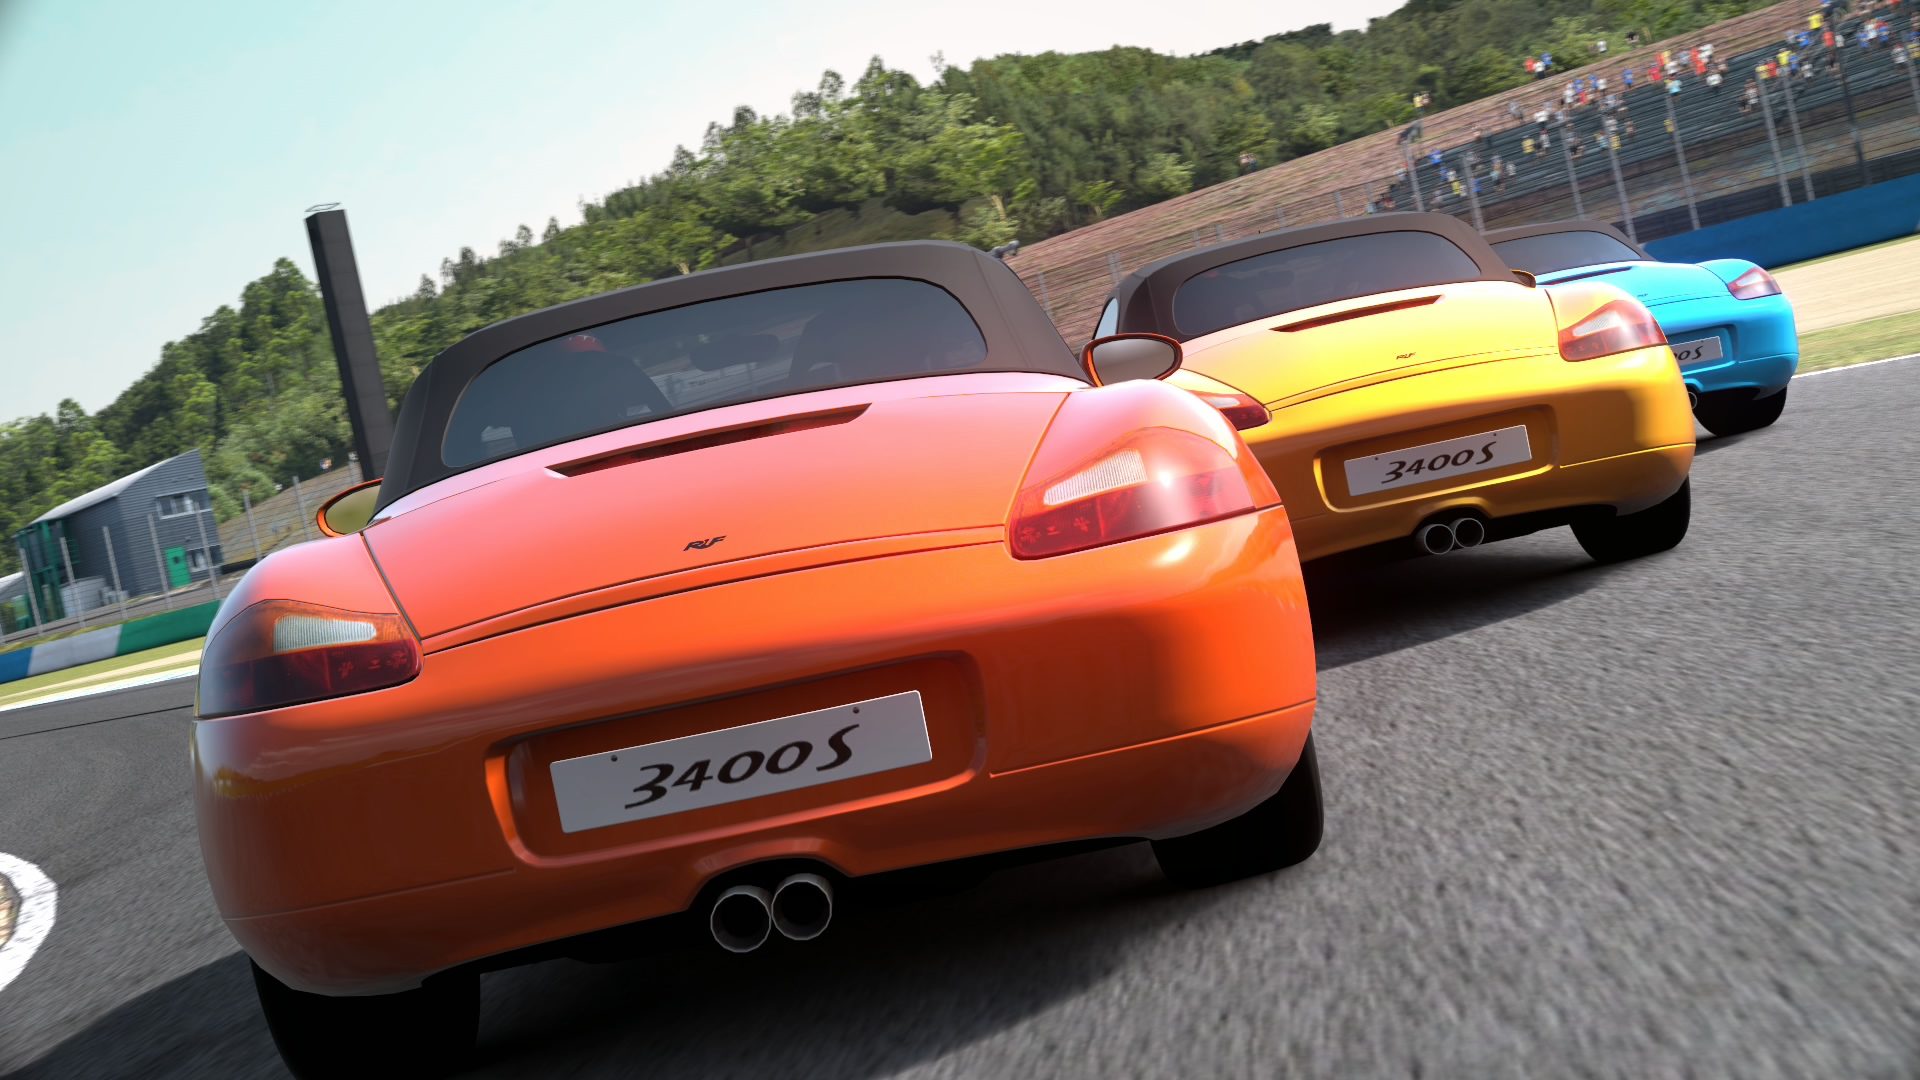 COTW Week 107 - RUF 3400S - Twin Ring Motegi Road Course